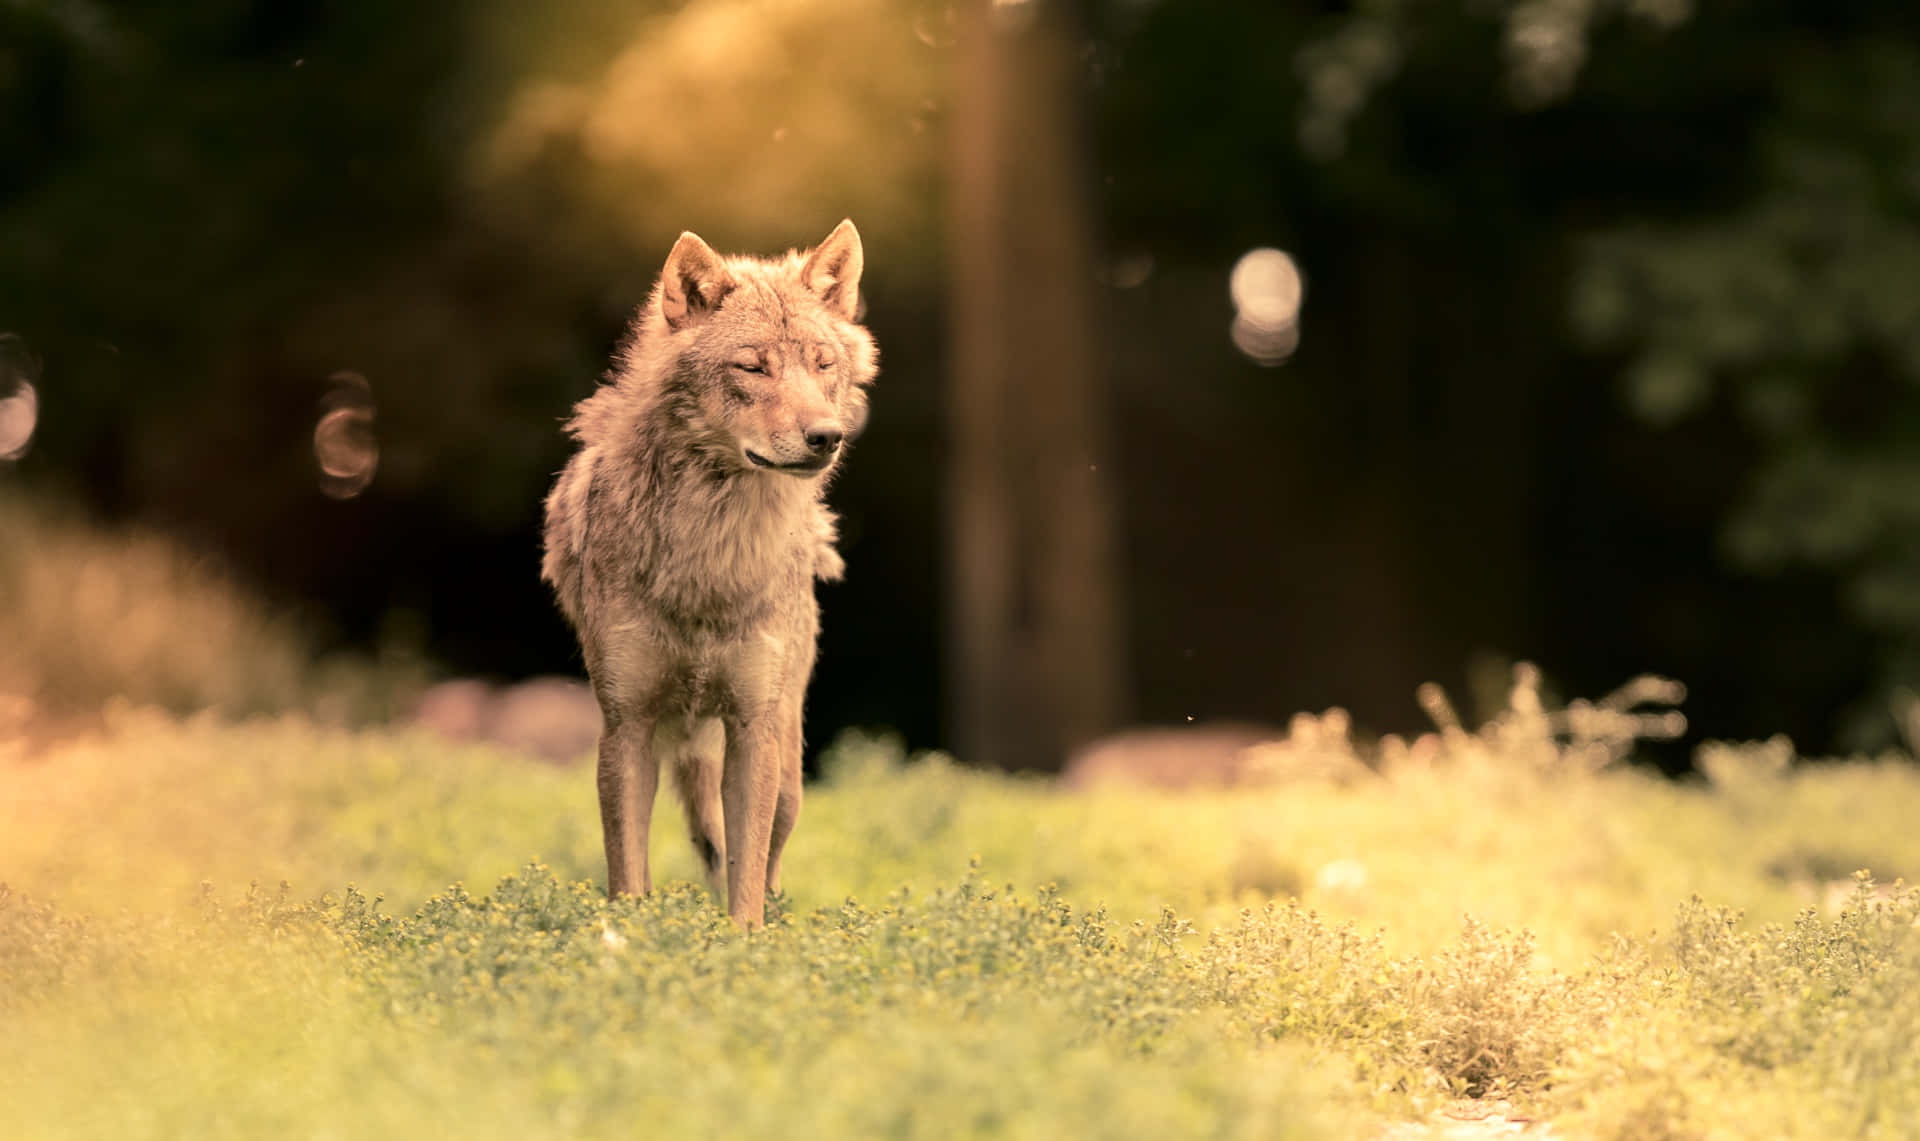 Adorable Wolf Pup In Its Natural Habitat Wallpaper